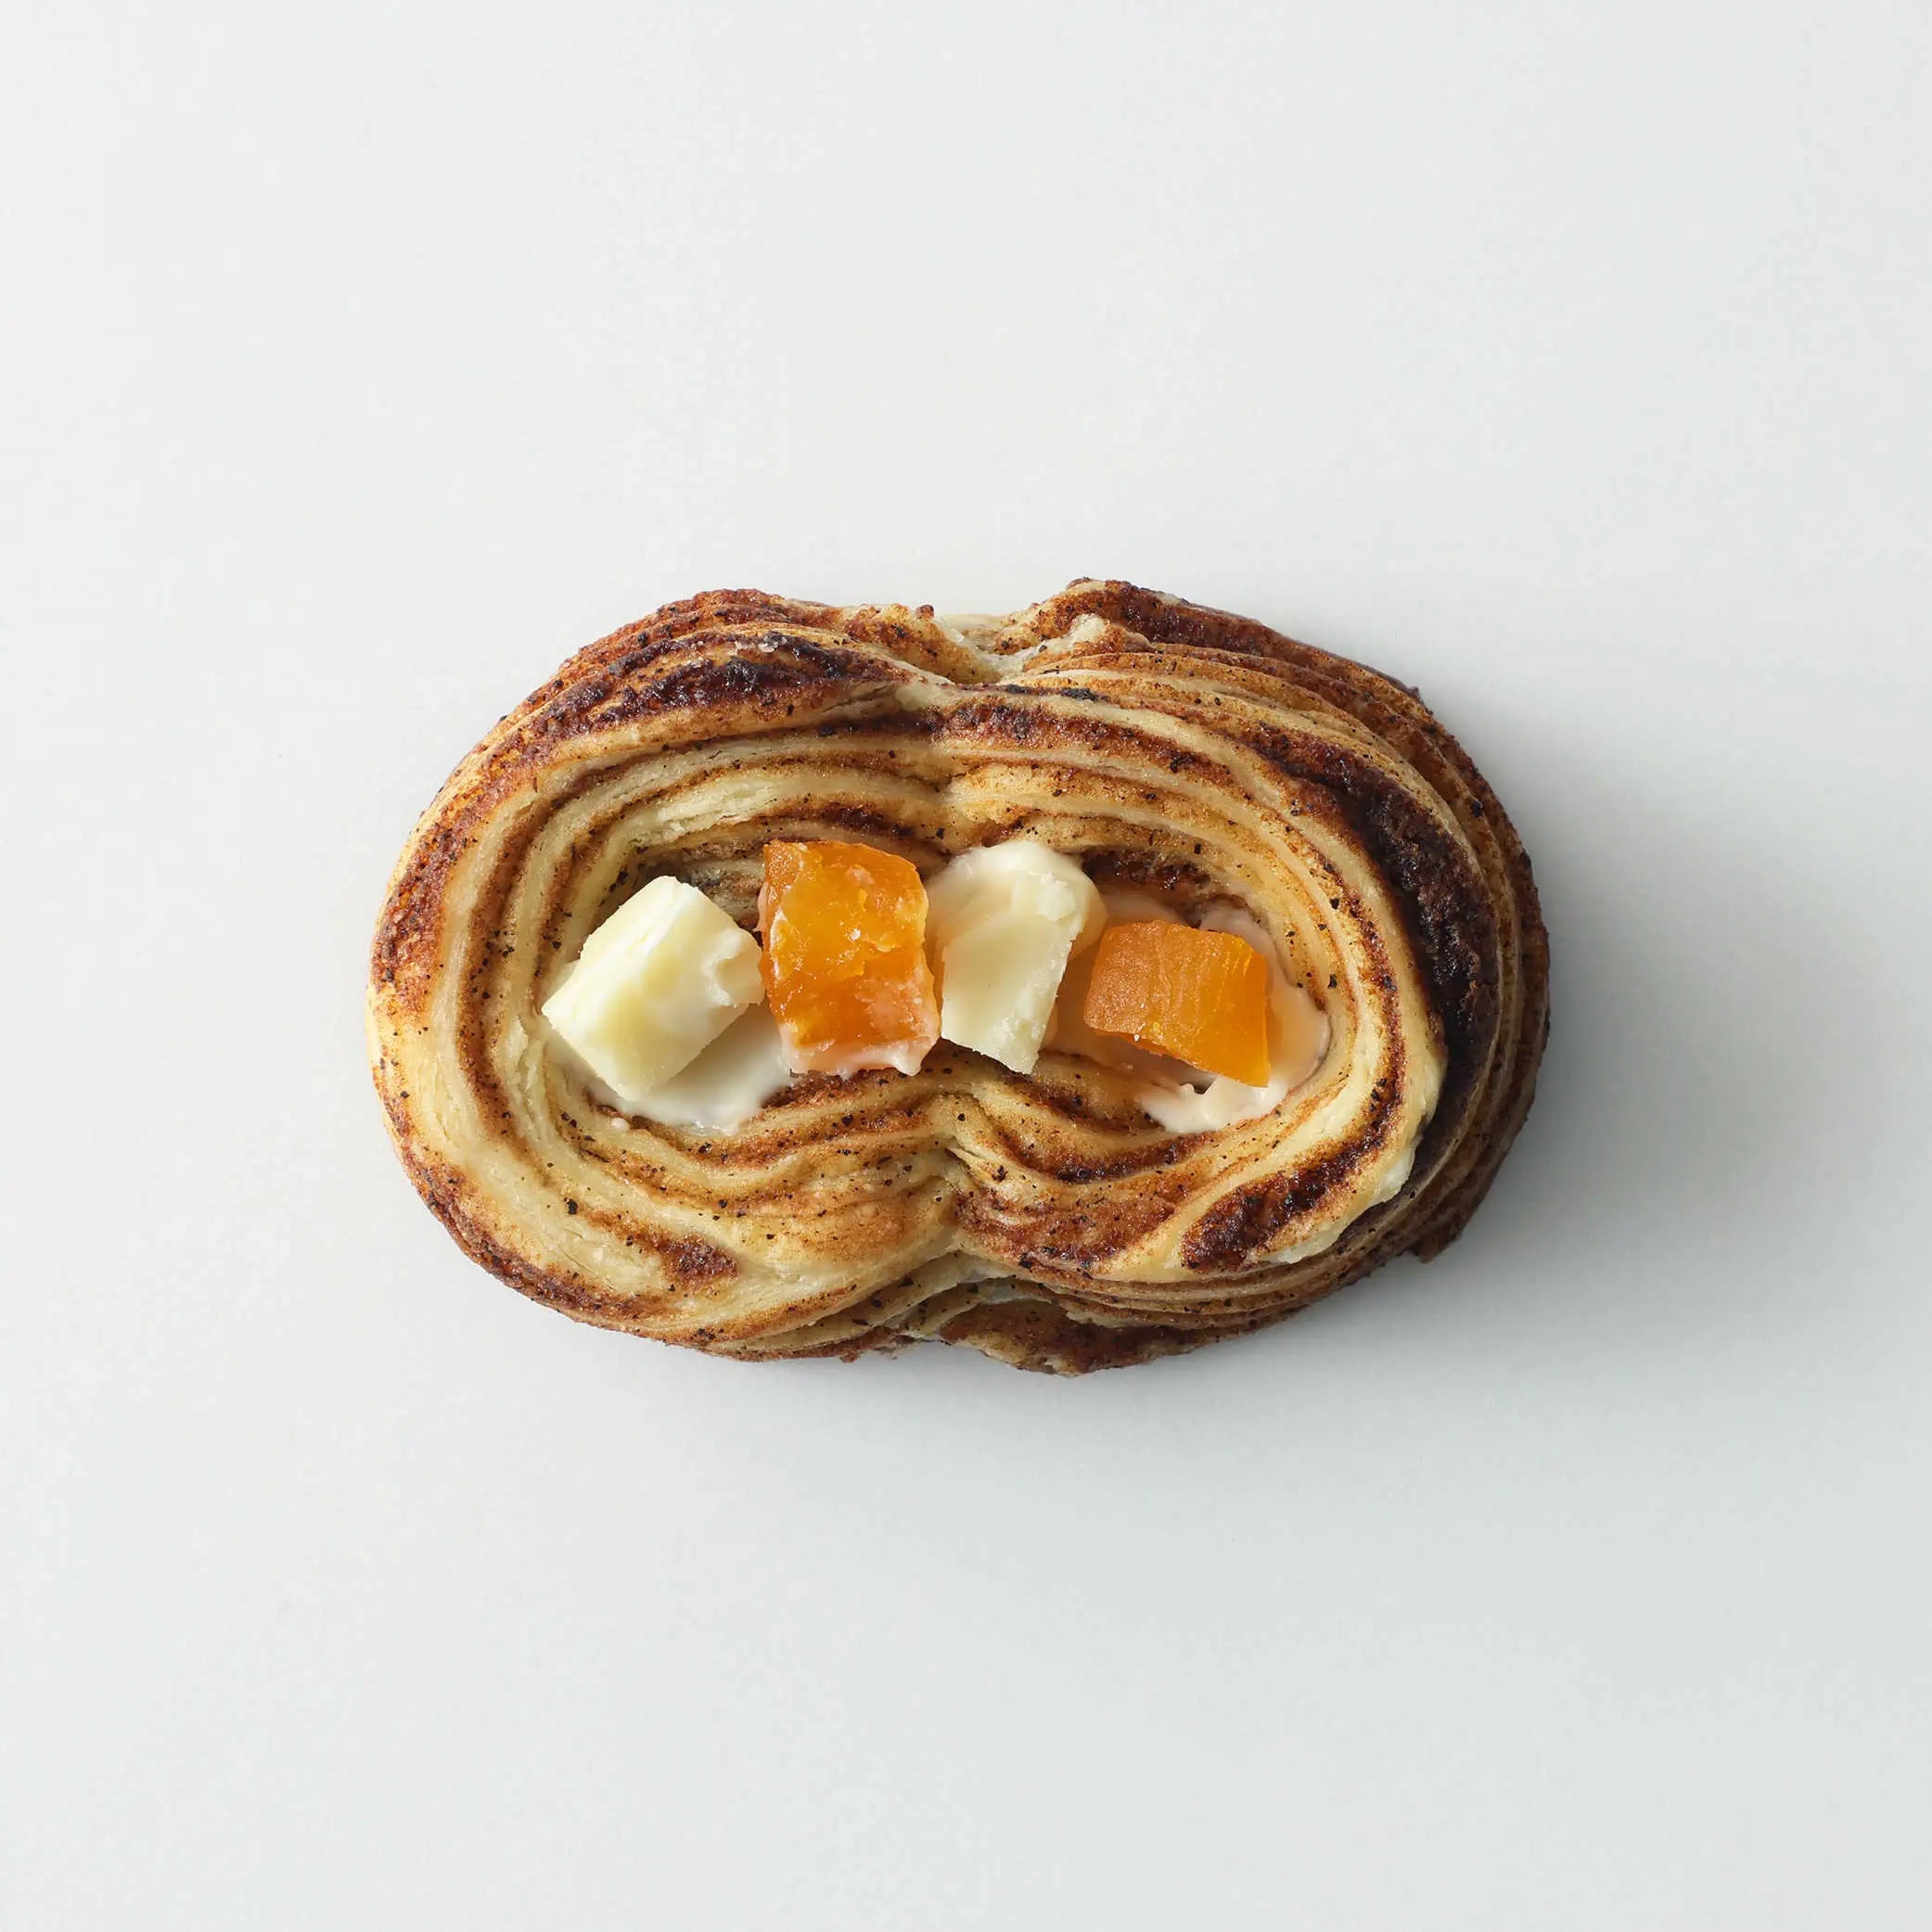 Apricot Earl Grey Abalone Puff Pastry - 2